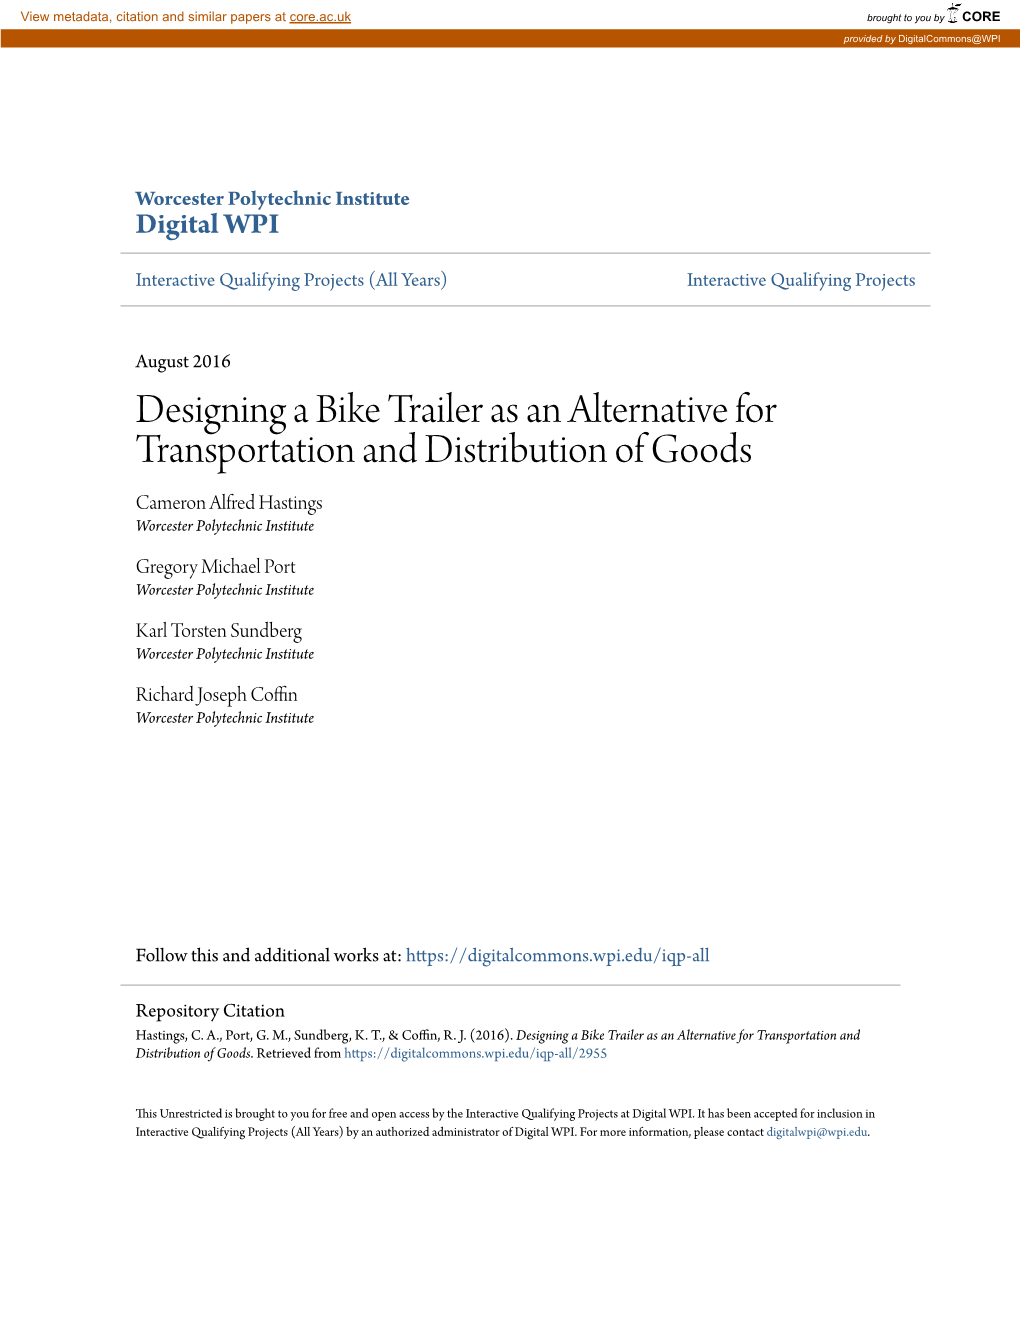 Designing a Bike Trailer As an Alternative for Transportation and Distribution of Goods Cameron Alfred Hastings Worcester Polytechnic Institute